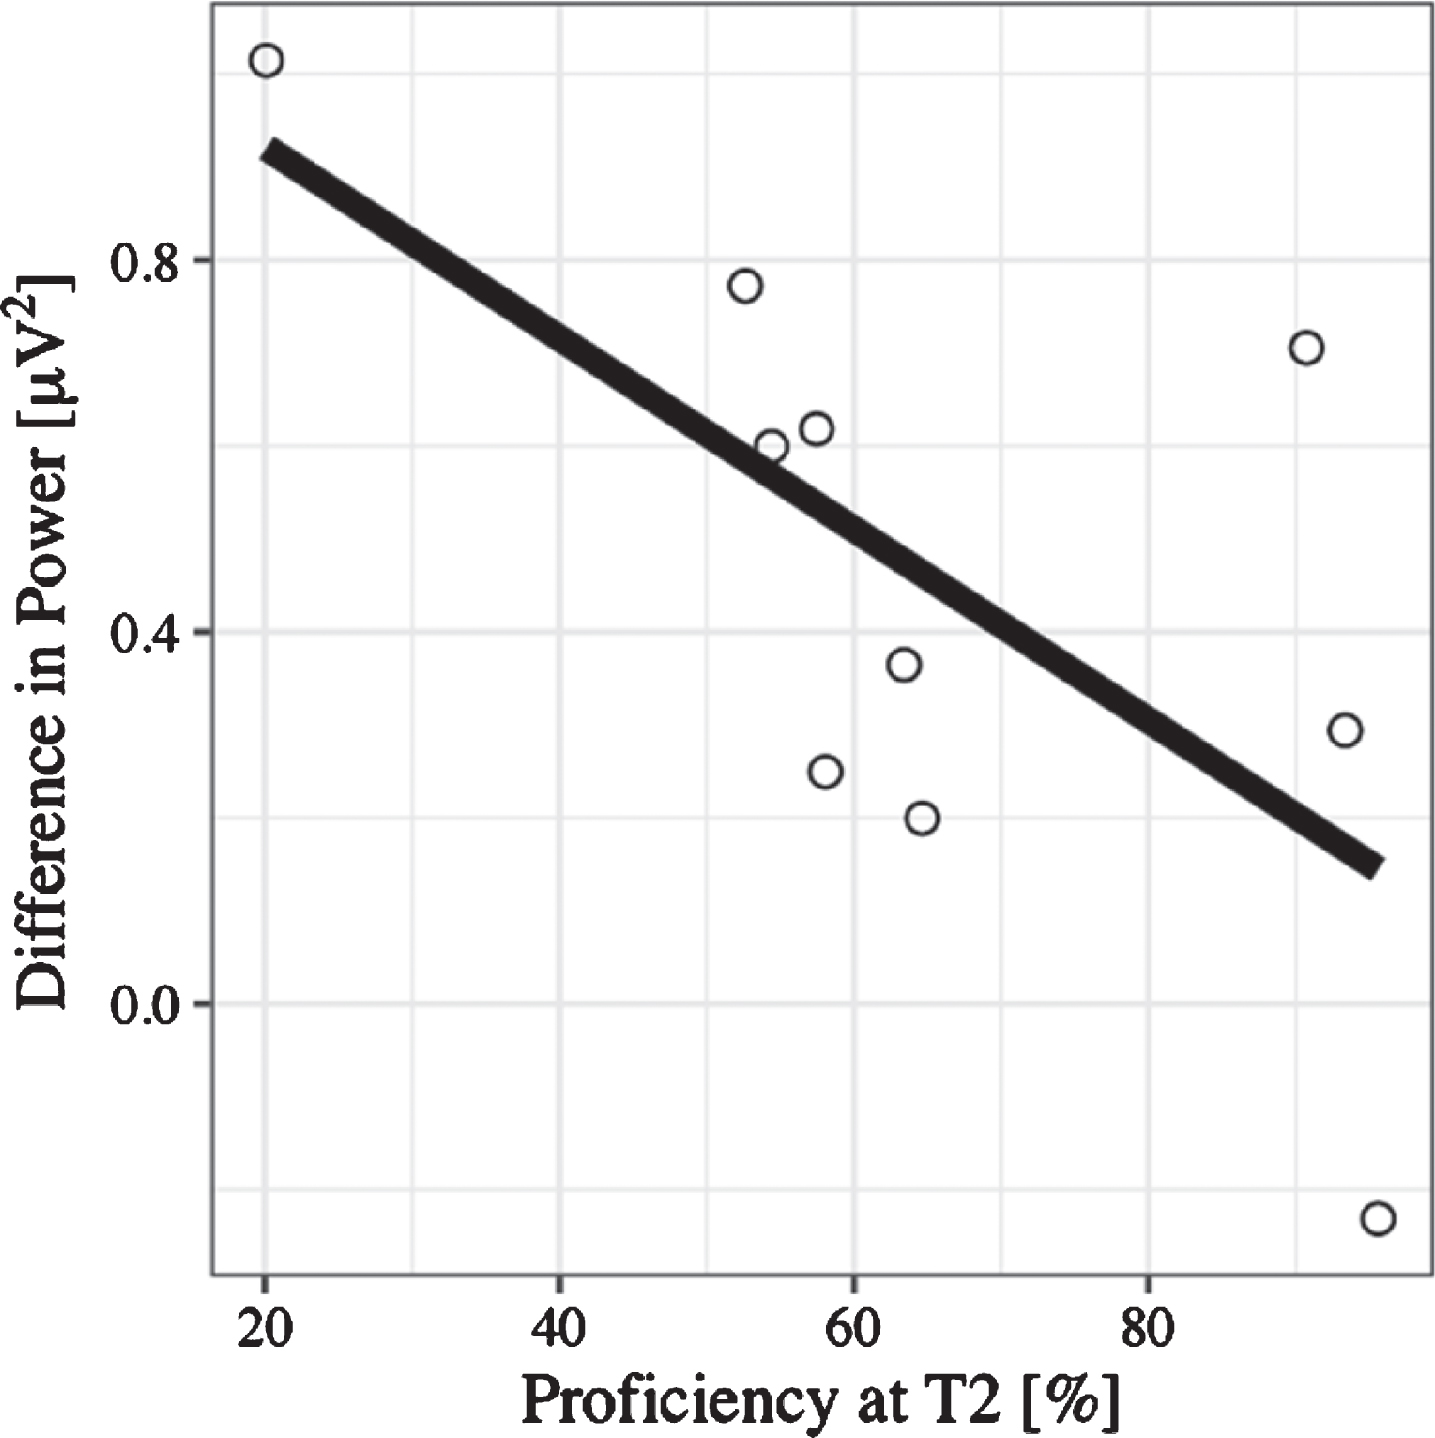 Regression plot for L2 proficiency at T2 and the N400 effect calculated as the difference between no language switch and language switch conditions, such that positive values on the y-axis represent the size of the fact (negativity inverted).